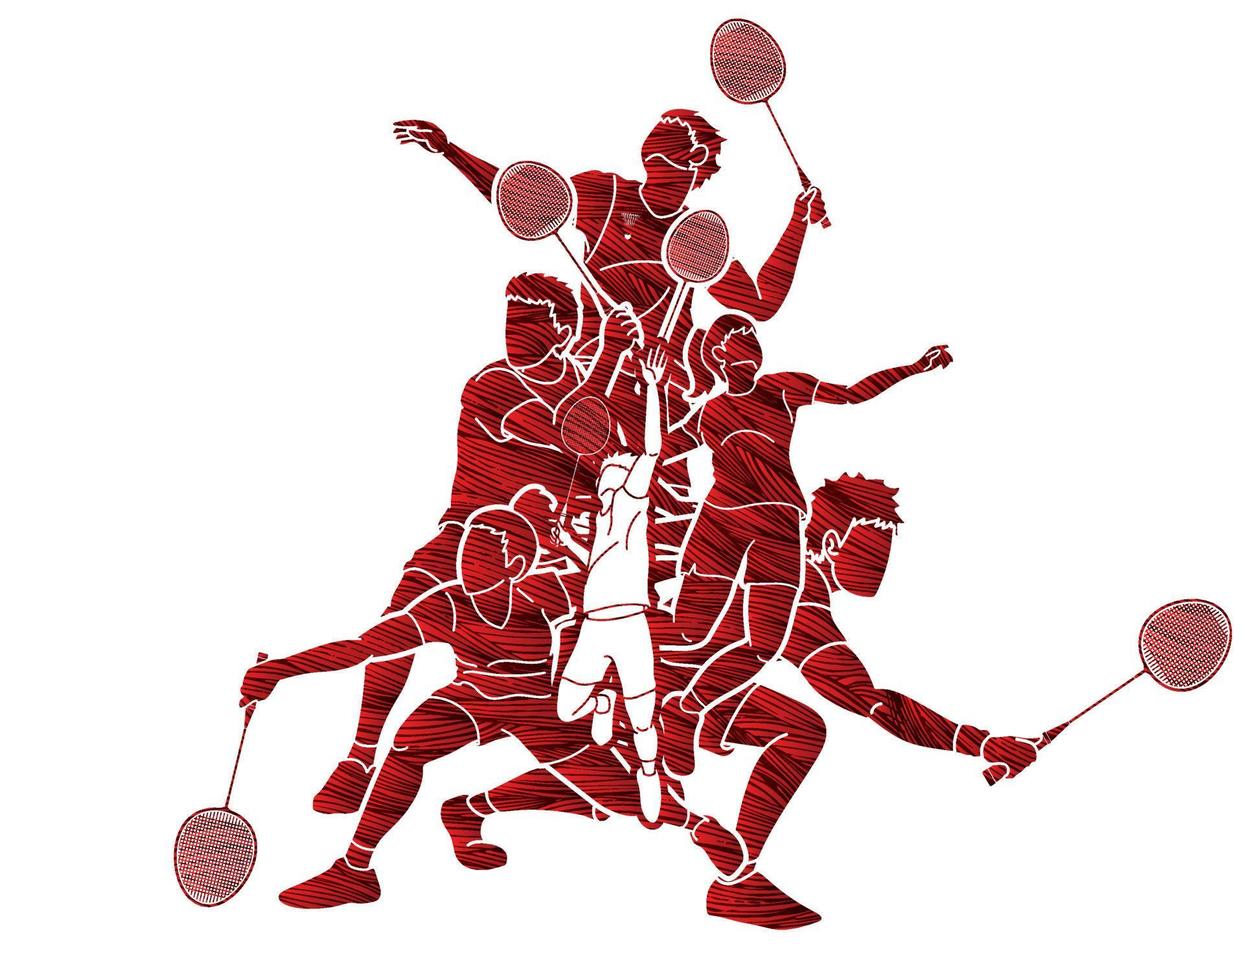 Group of Badminton Players Action vector